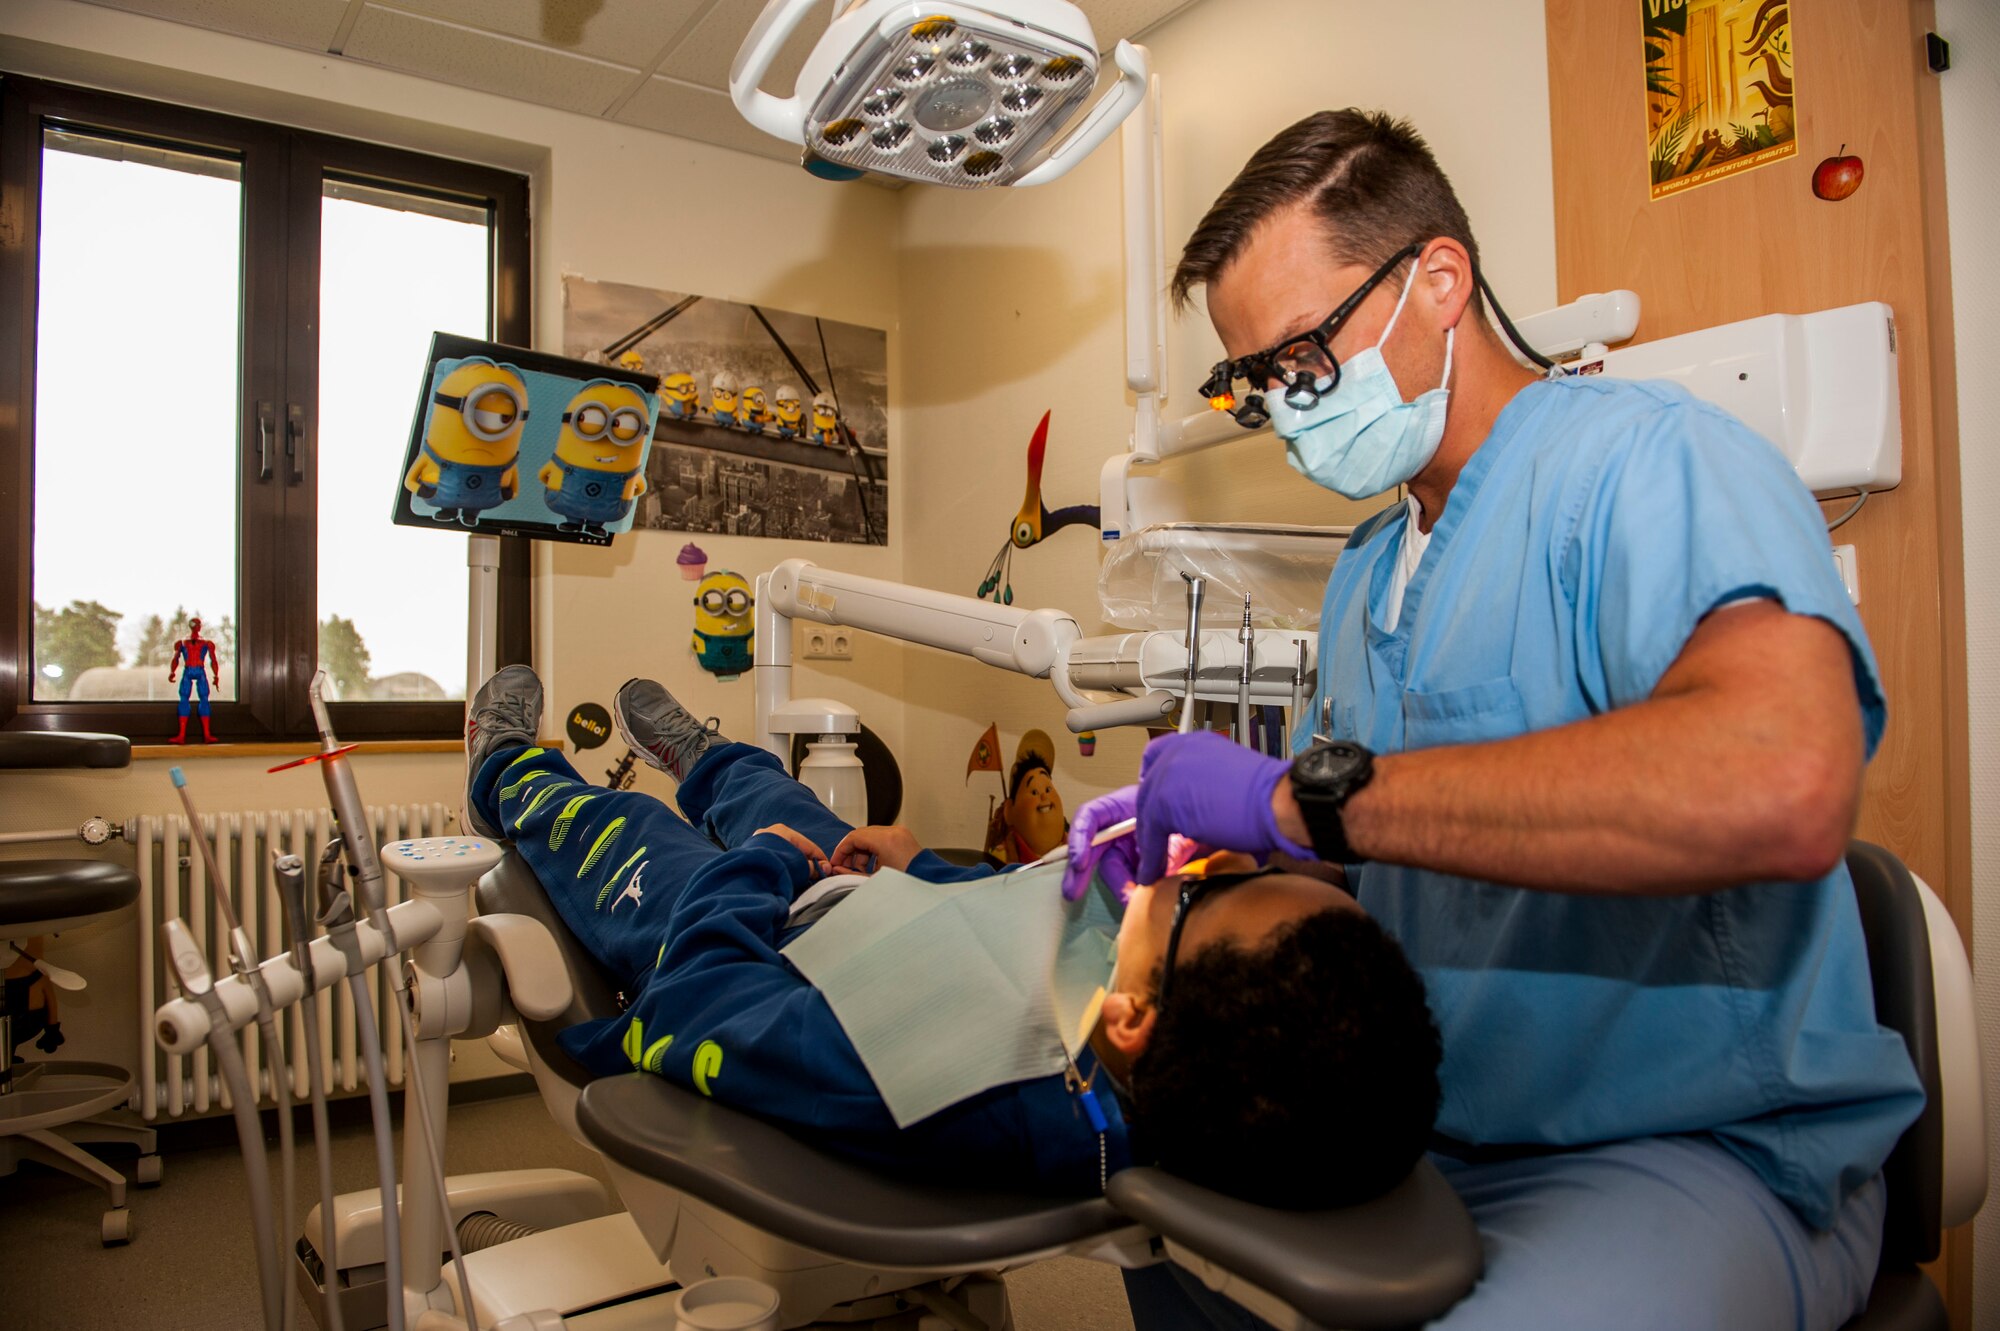 U.S. Air Force Capt. Jon Federspiel, a 52nd Dental Squadron general dentist, inspects the state of a 52nd Fighter Wing child’s oral hygiene during the dental clinic’s semi-annual children’s walk-in at Spangdahlem Air Base, Germany, April 22, 2016. More than 50 children received dental care, examinations and oral hygiene tips during at the clinic. (U.S. Air Force photo by Airman 1st Class Timothy Kim/Released)